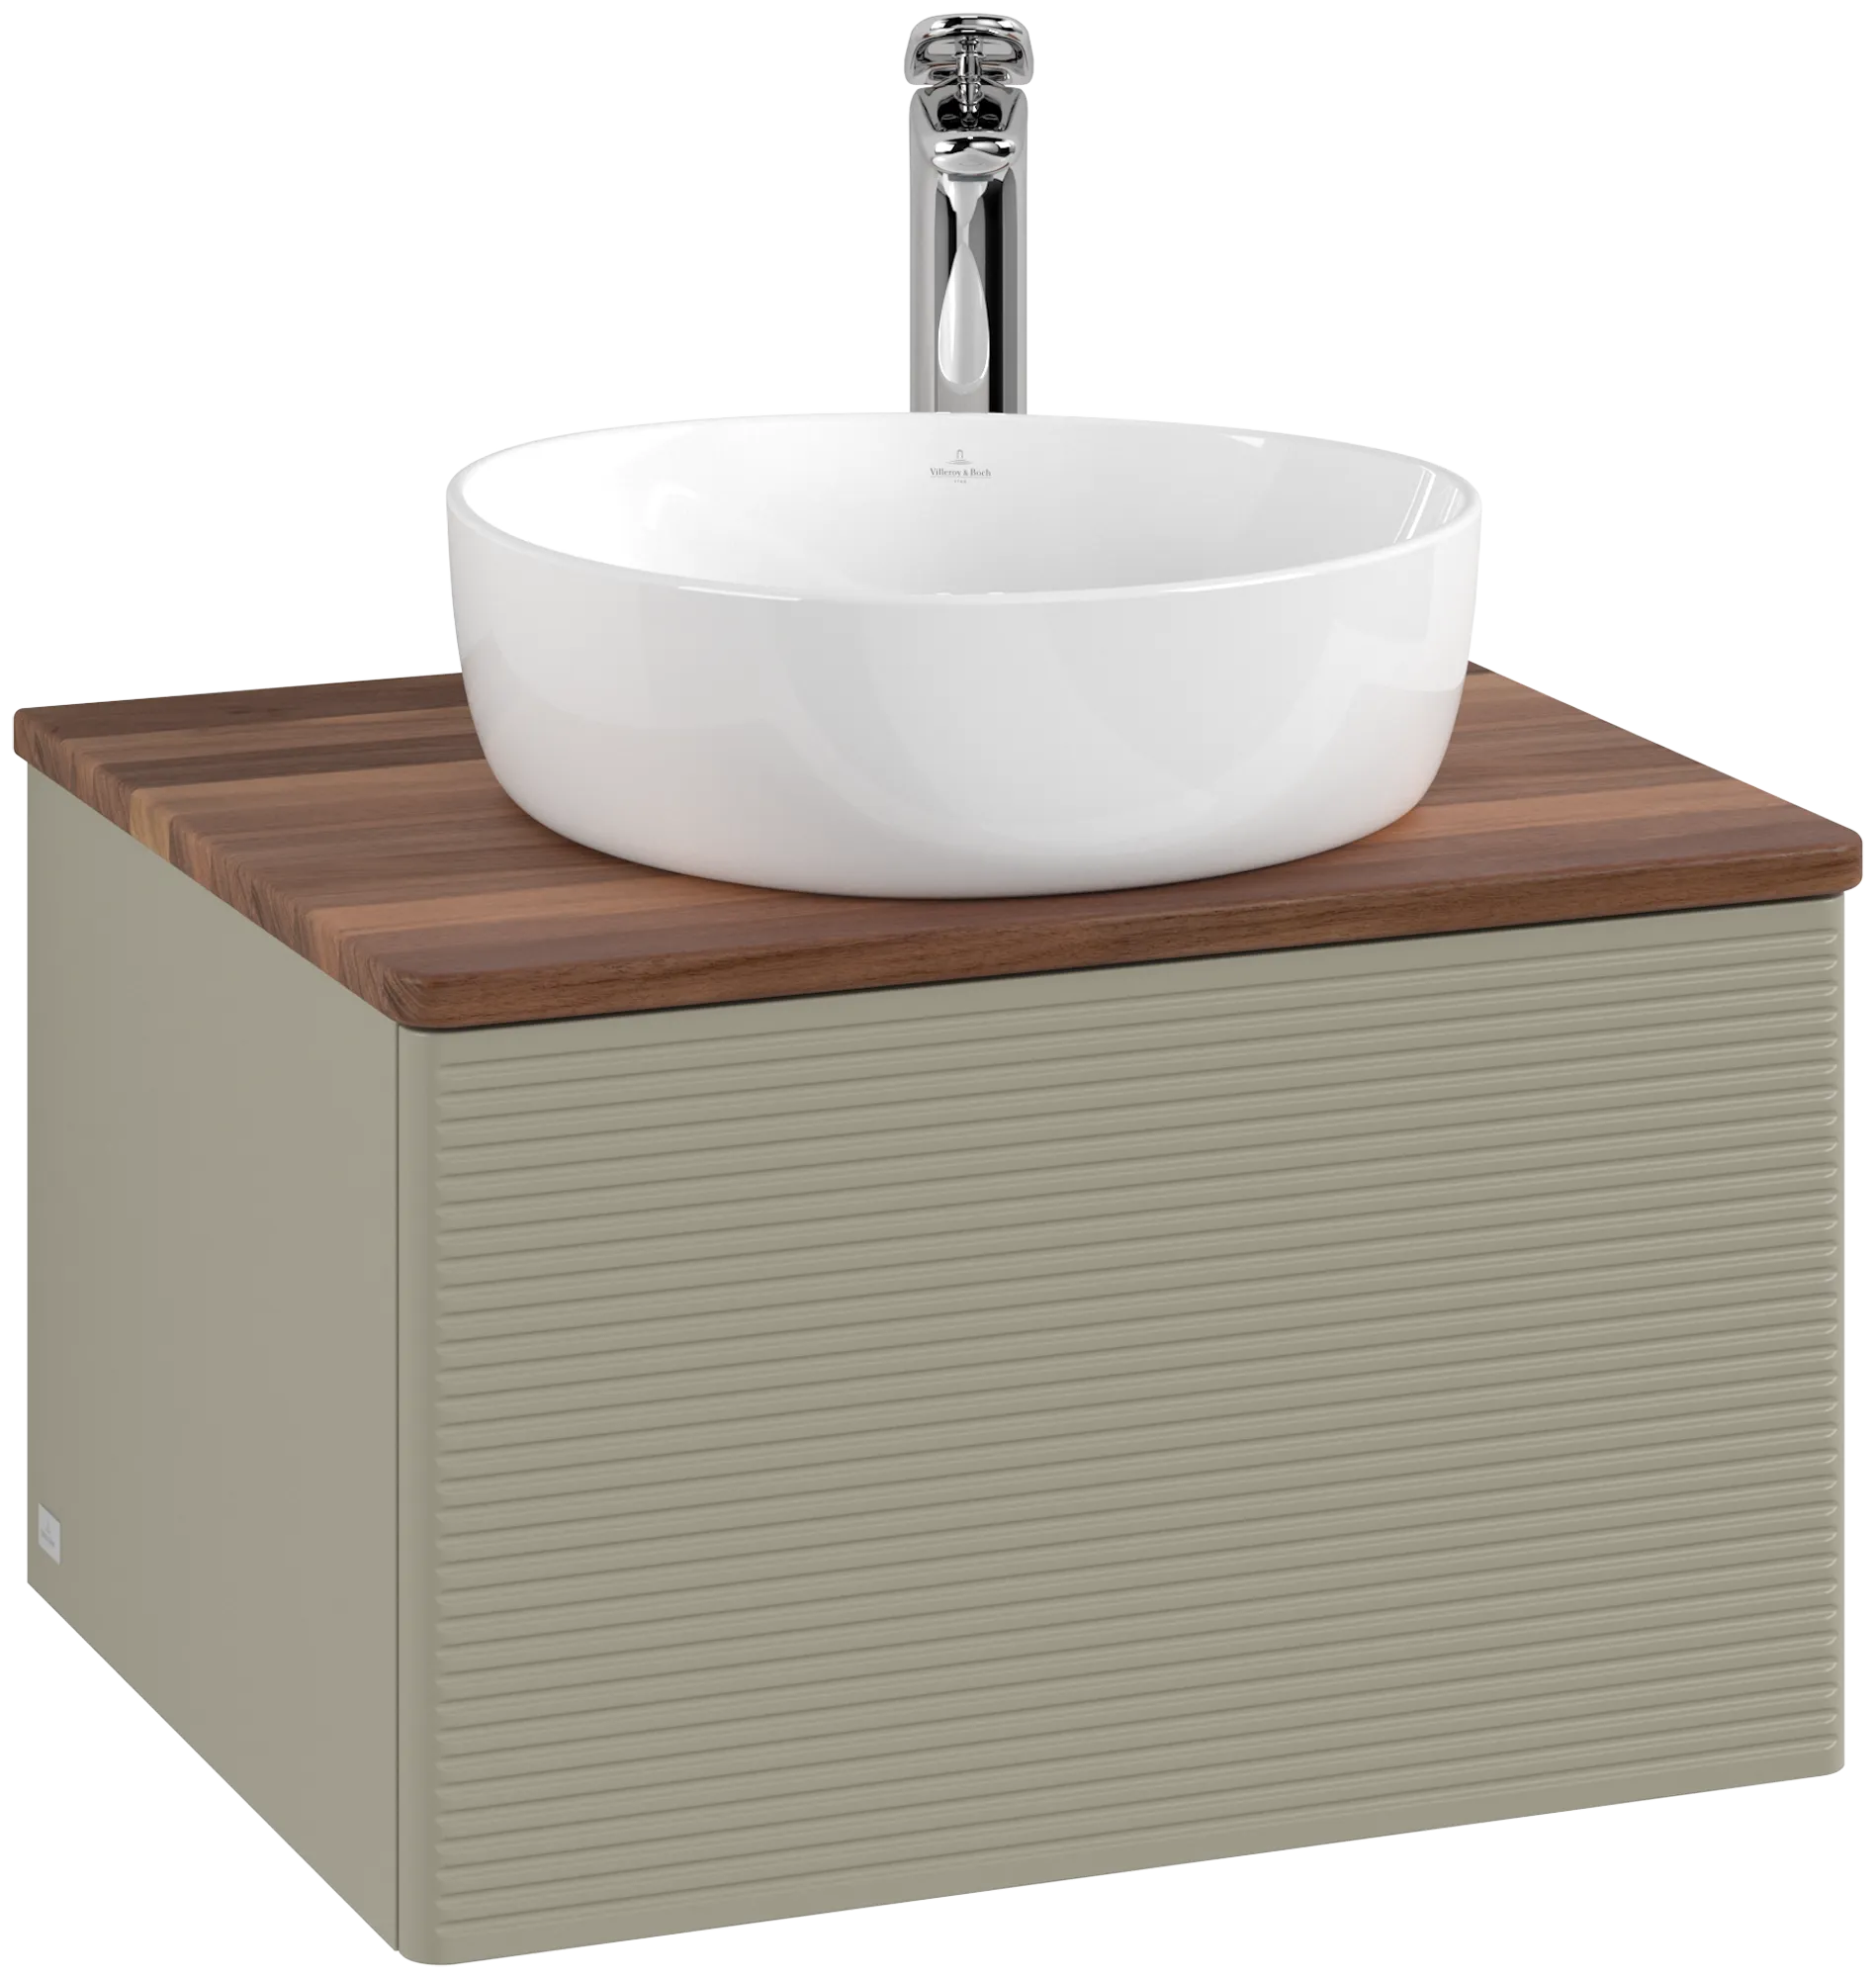 Picture of VILLEROY BOCH Antao Vanity unit, with lighting, 1 pull-out compartment, 600 x 360 x 500 mm, Front with grain texture, Stone Grey Matt Lacquer / Warm Walnut #L29152HK